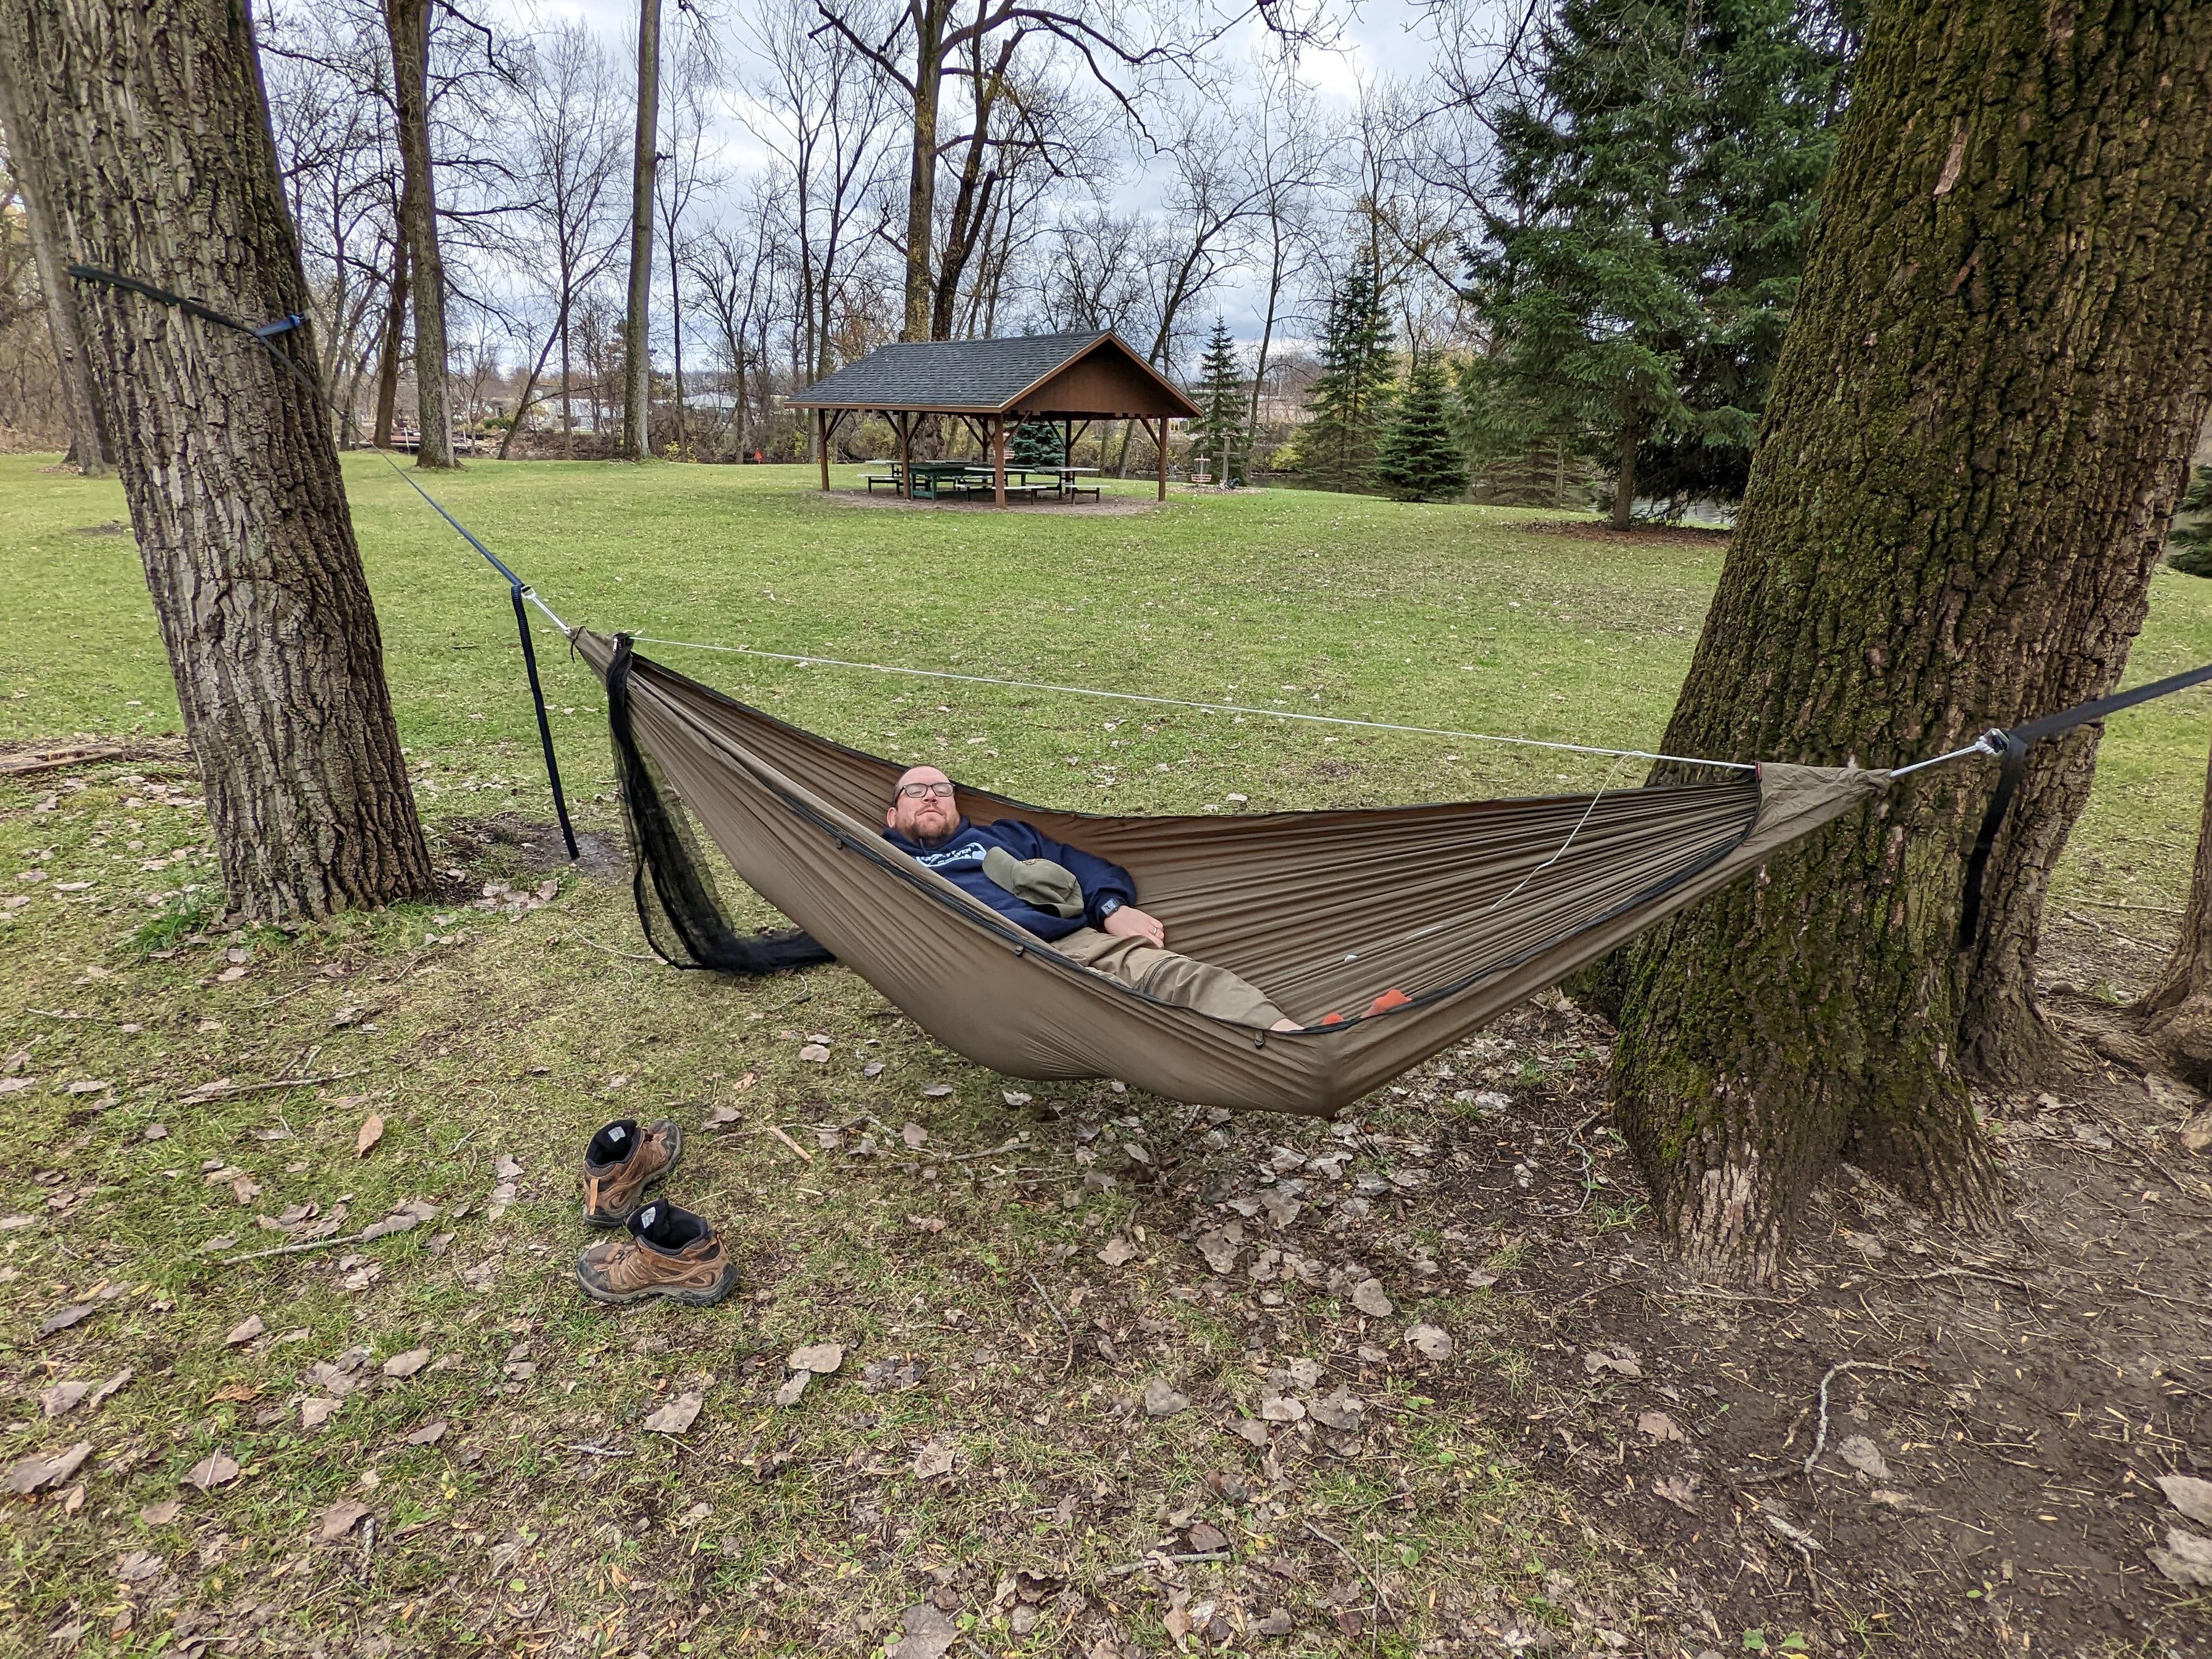 the author in their hammock, sans underquilt or tarp